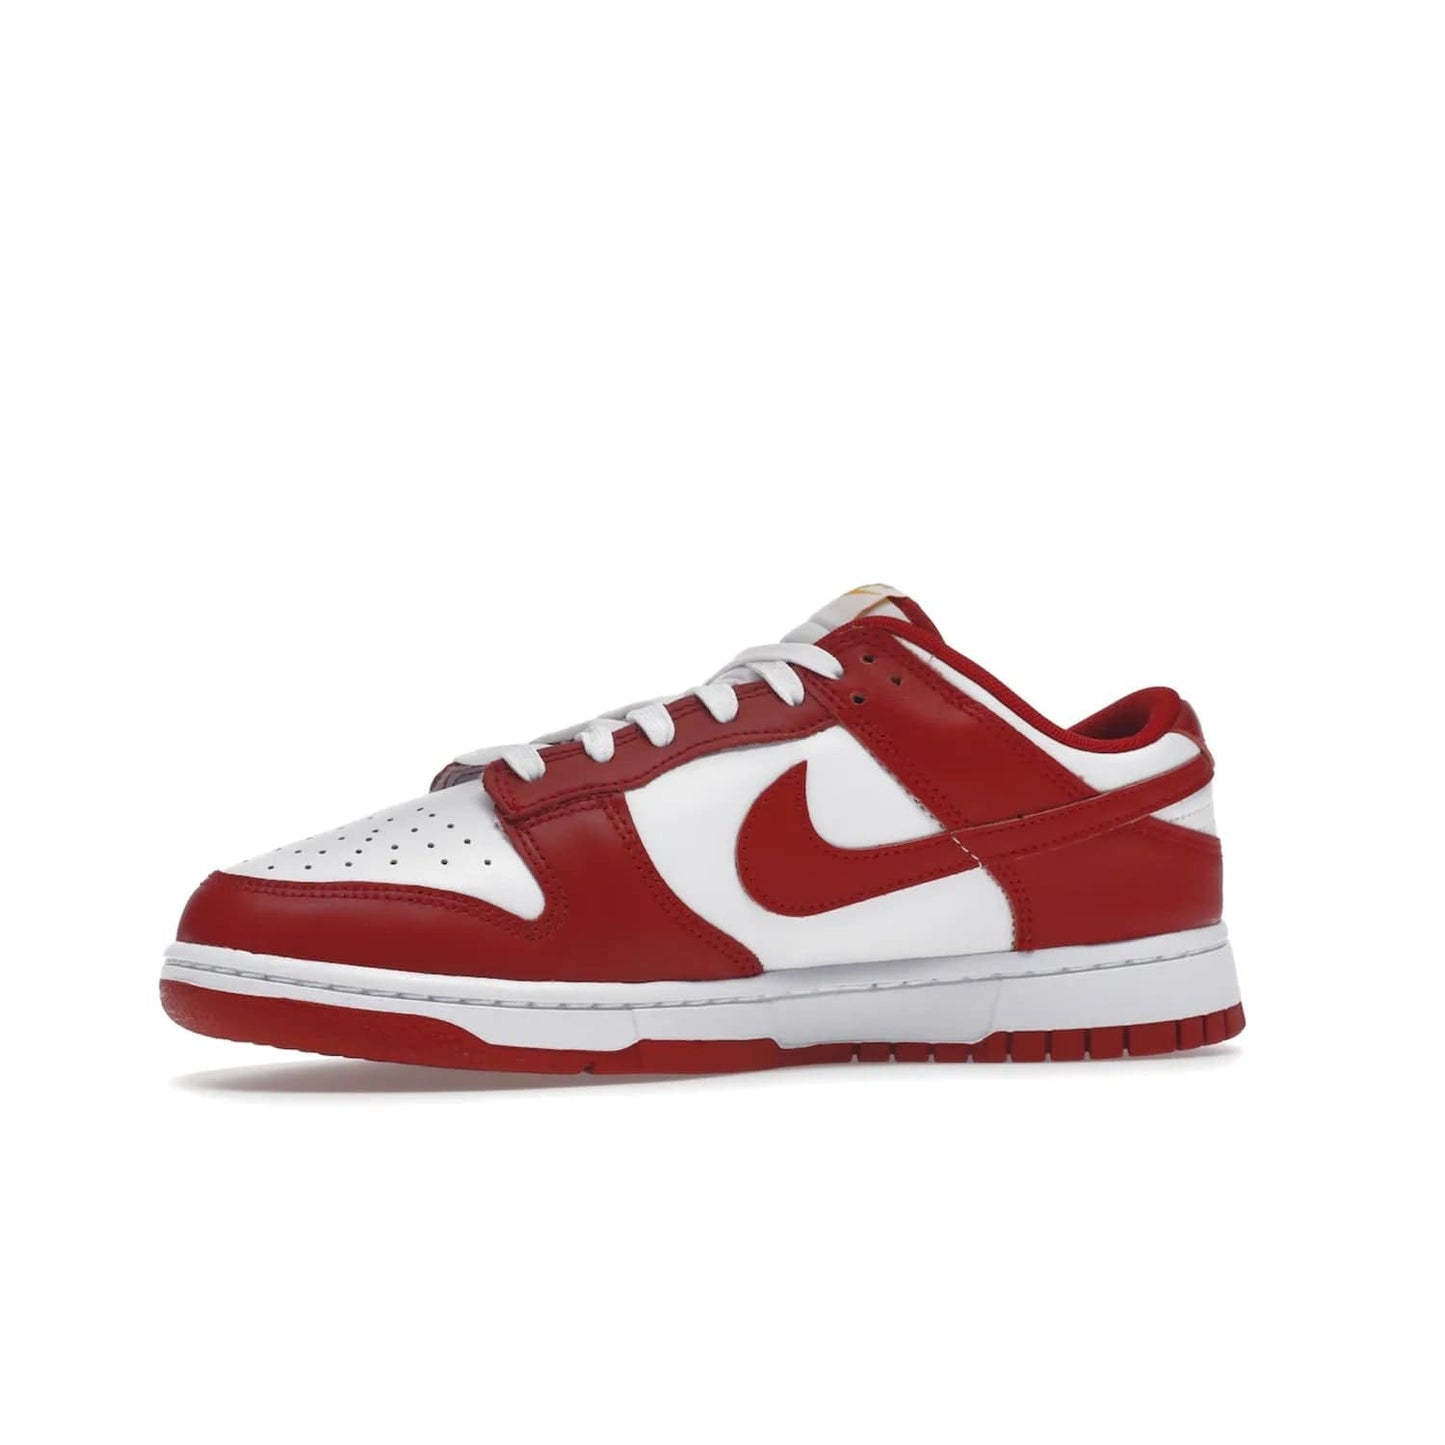 Nike Dunk Low USC - Image 17 - Only at www.BallersClubKickz.com - The Nike Dunk Low USC DD1391-602 colorway captures the eye of University of Southern California fans. Crafted with leather and rubber upper and outsole, this stylish sneaker features a white, gym red, and yellow colorway. With yellow Nike branding, white perforated vamp, and red suede Swoosh, this sneaker turns heads. Get the classic Nike Dunk Low USC releasing on November 9th, 2022.